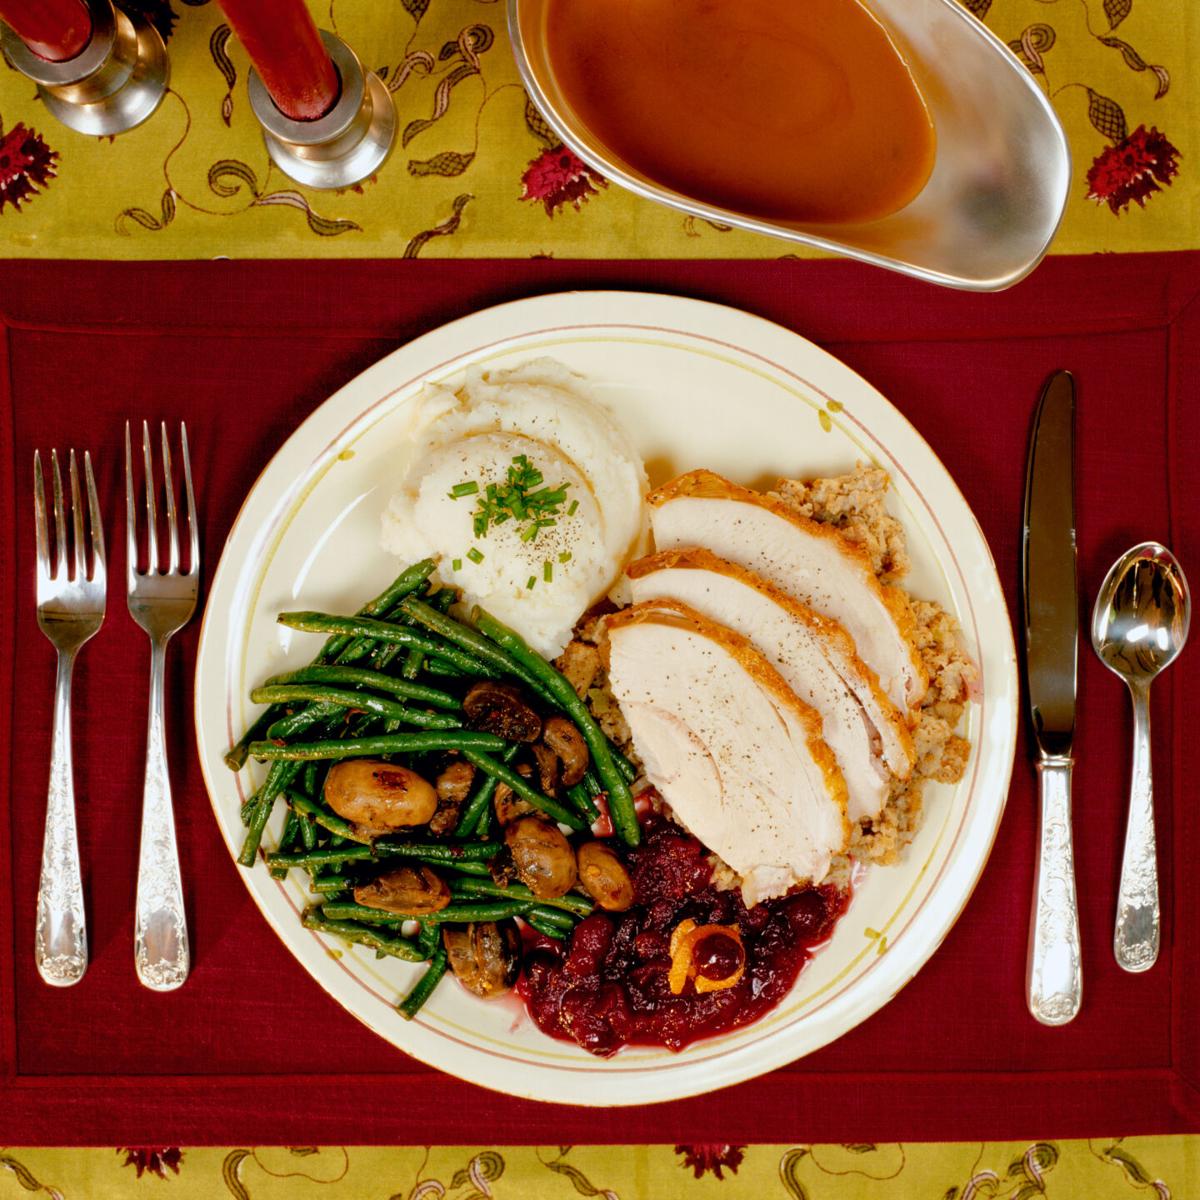 5 Tucson places offering Thanksgiving help with free meals, turkeys and